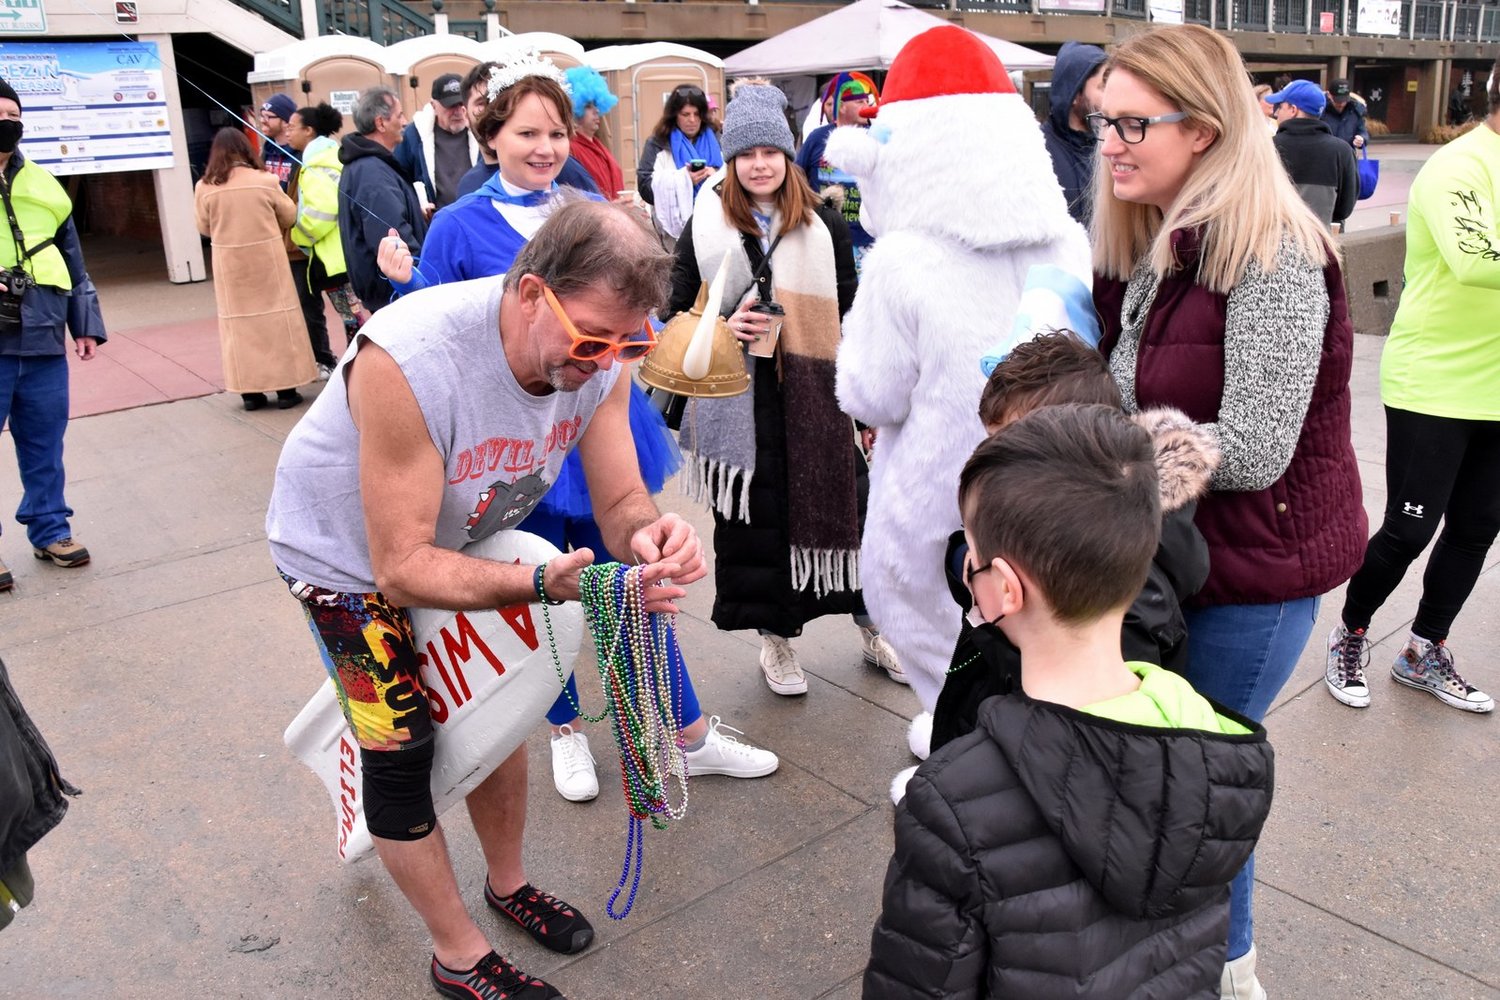 Bryan Ganley passes out Mardi Gras beads to young spectators, including Wish Child Benjamin and his Mom and brother, on Easton’s Beach at Saturday’s New Year’s Day event.